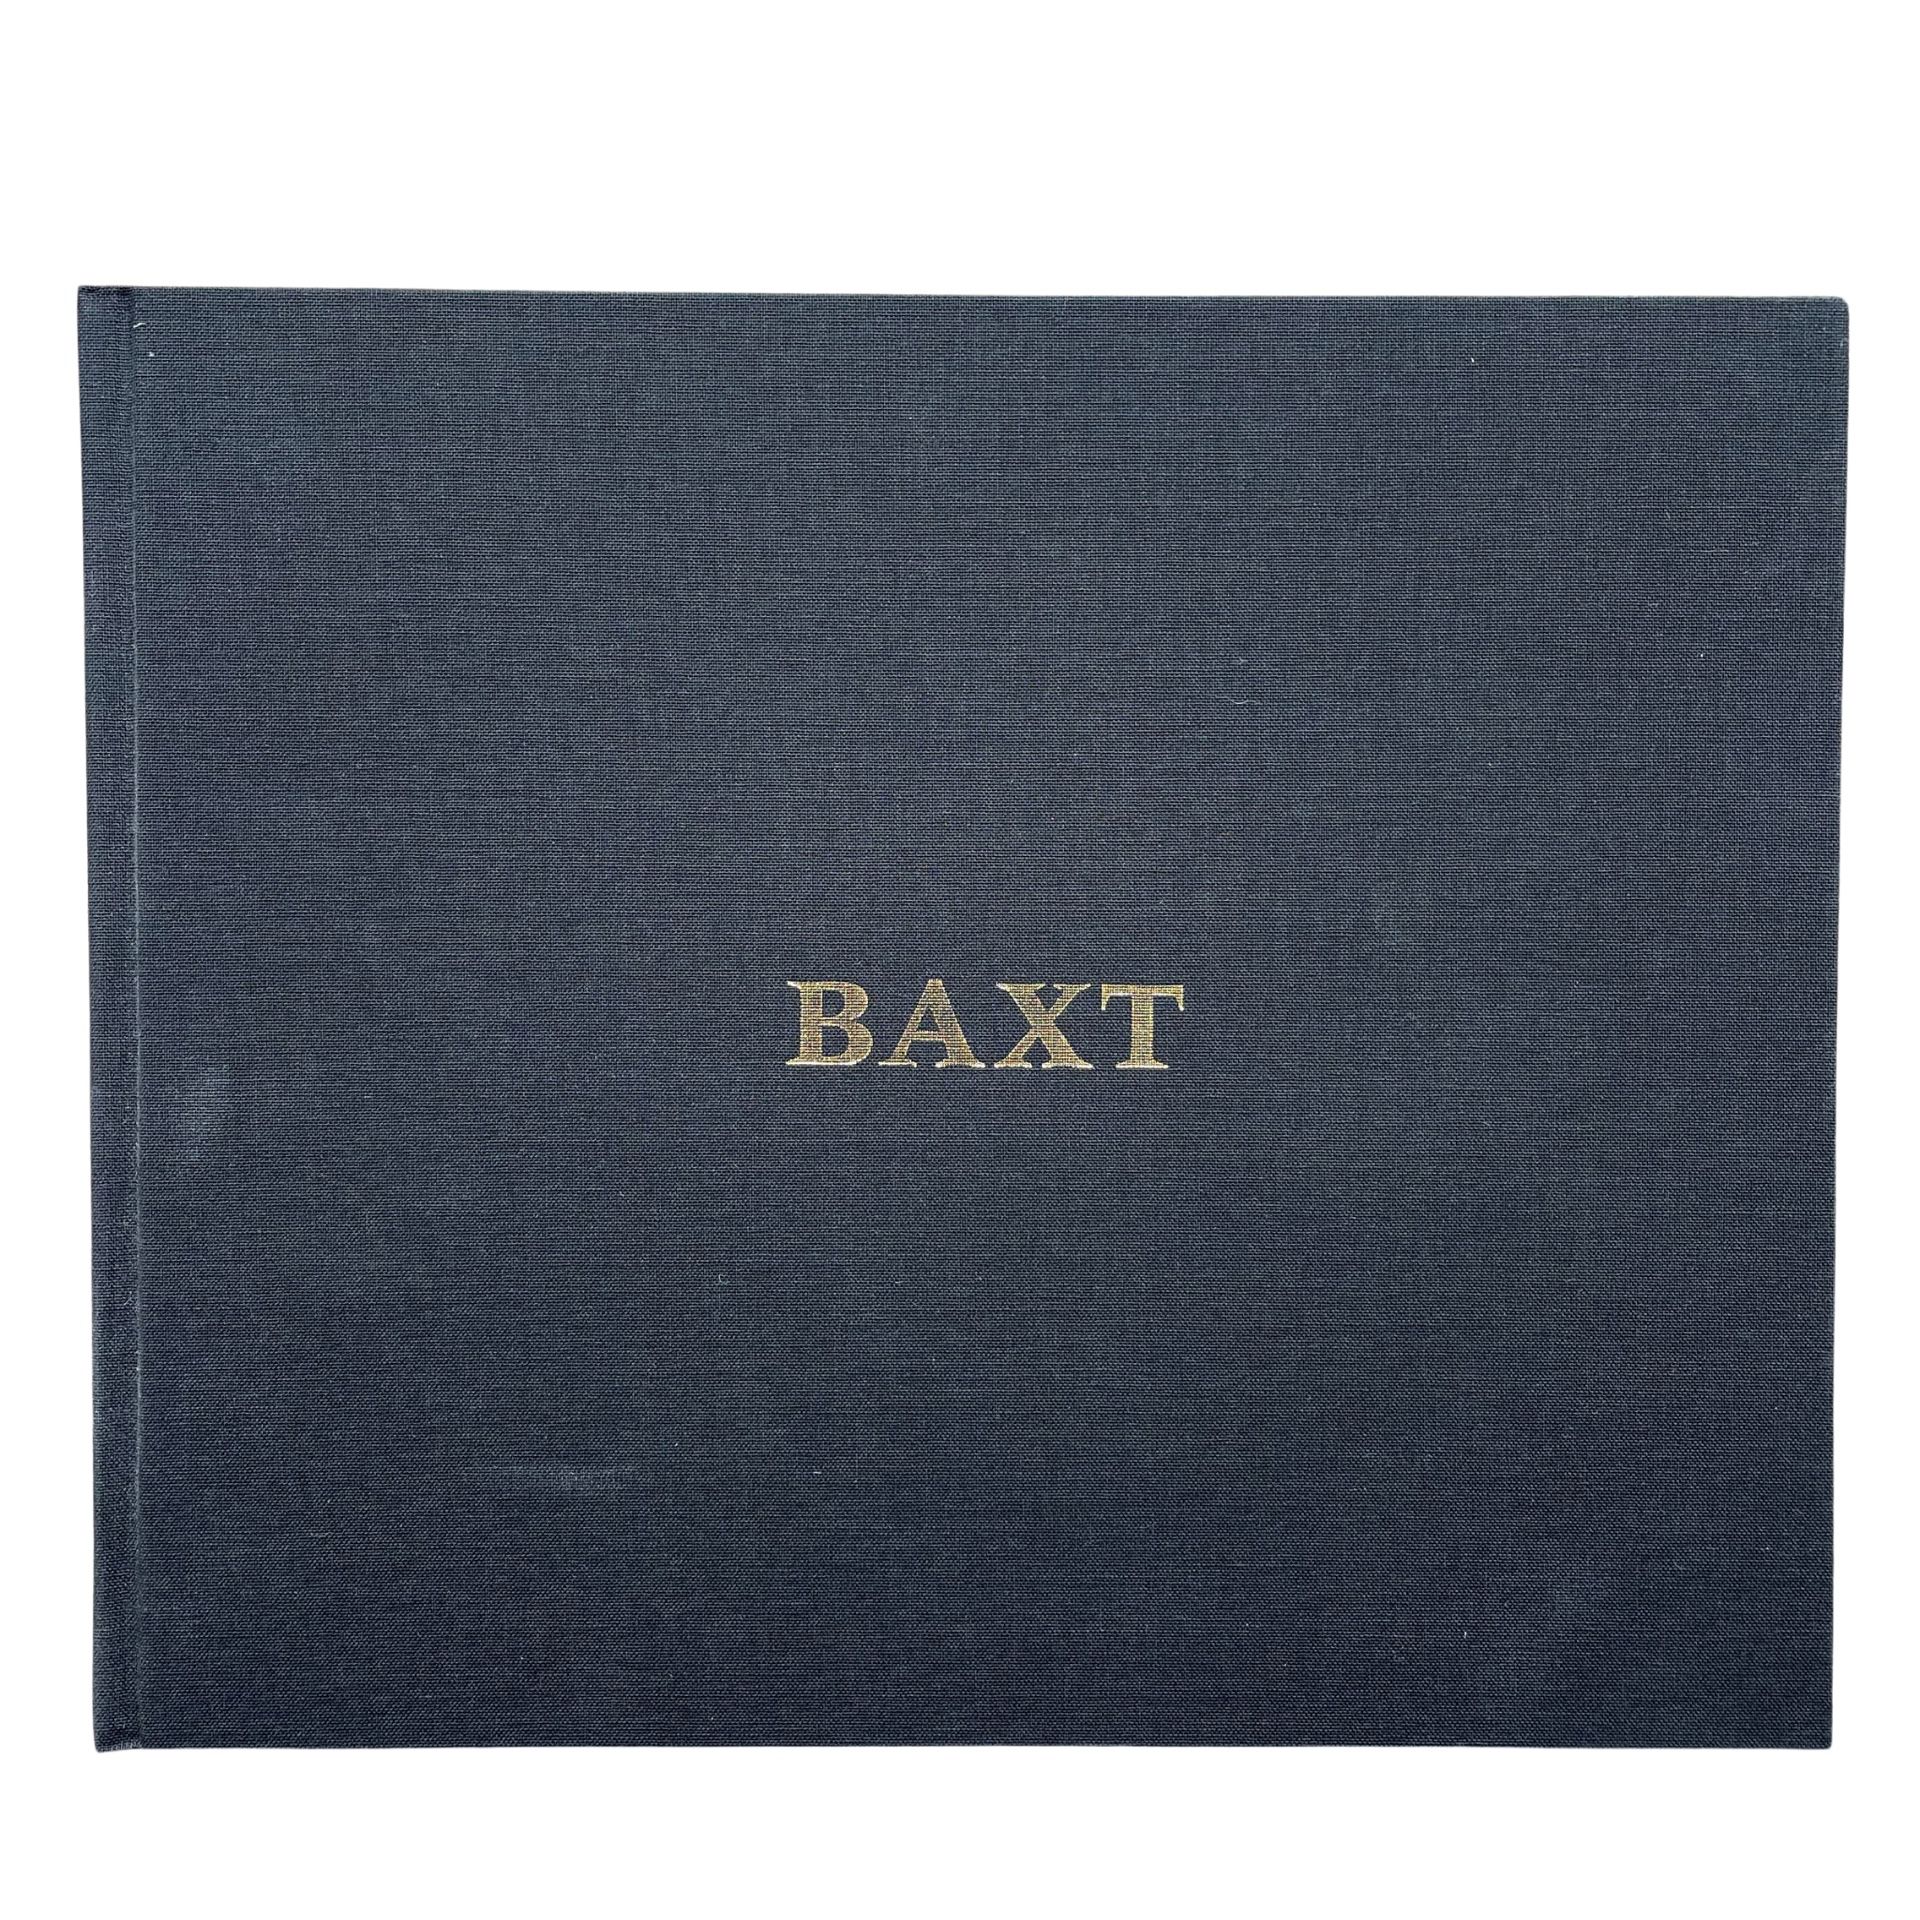 Andrew Miksys Andrei Codrescu BAXT Deluxe Edition Book Signed 23/75